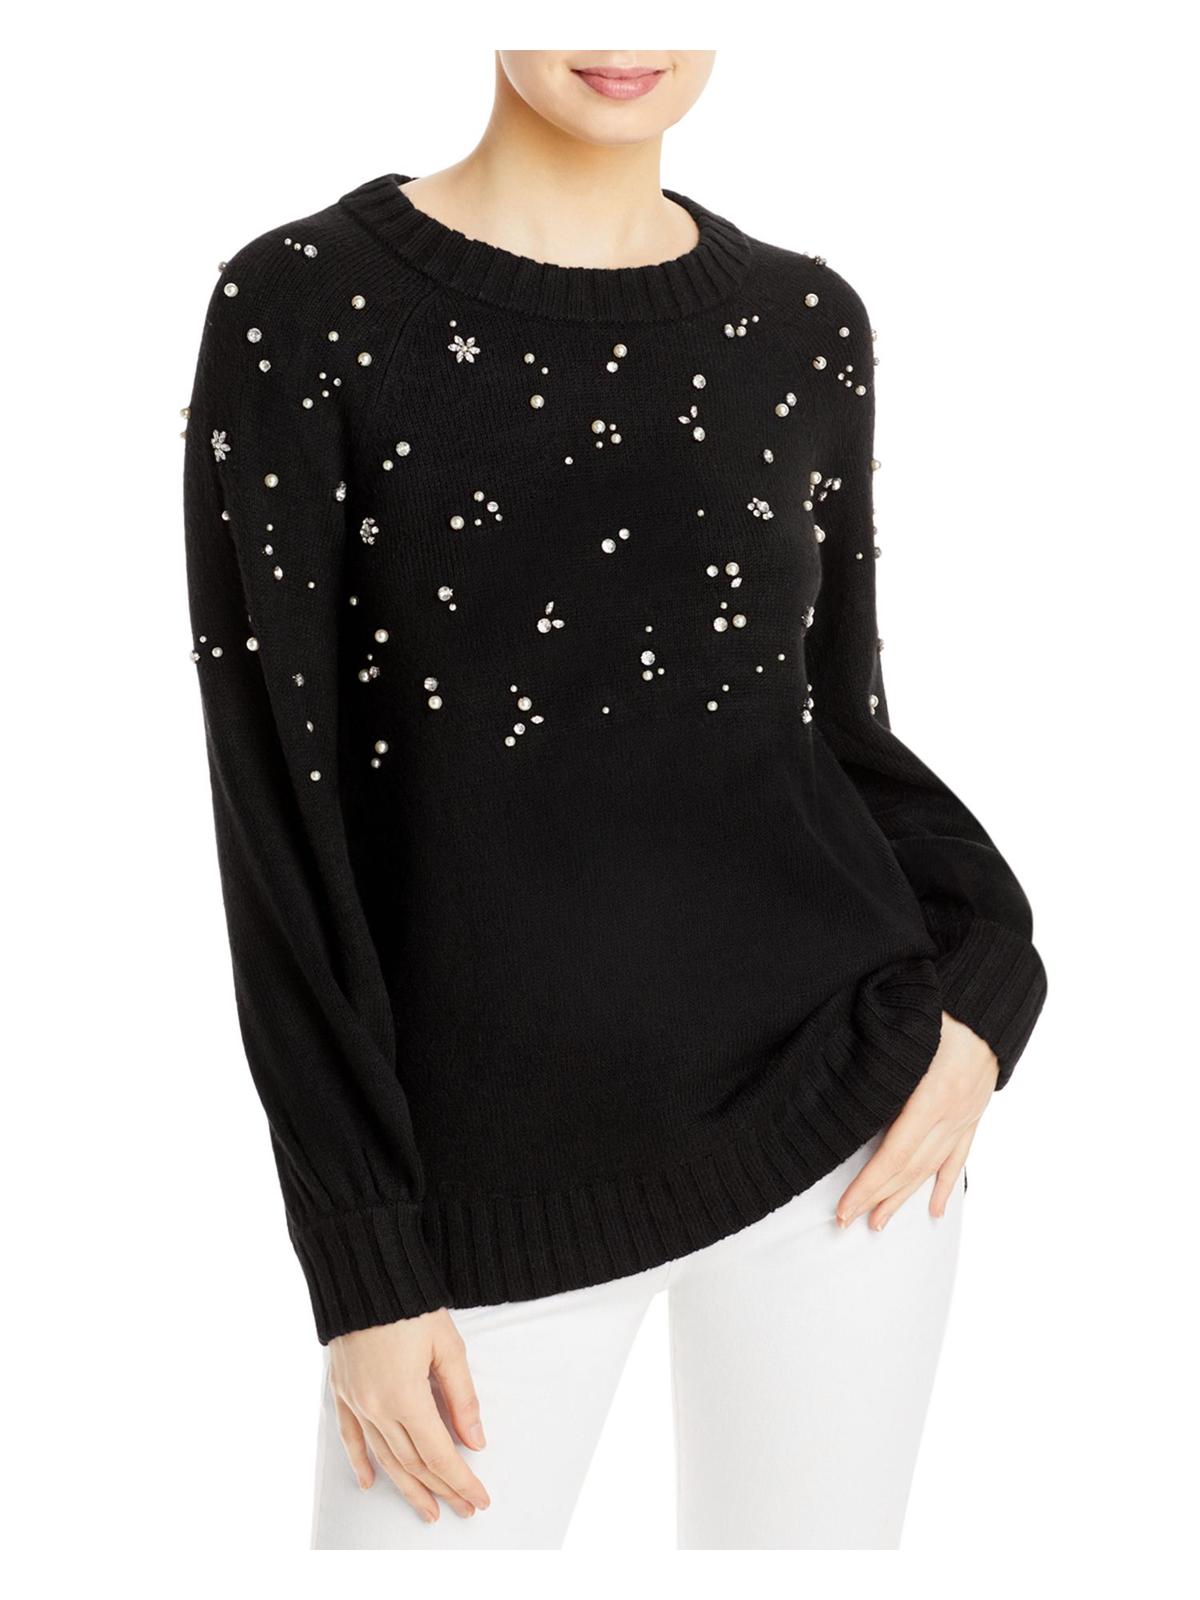 KARL LAGERFELD Womens Embellished Crewneck Pullover Sweater